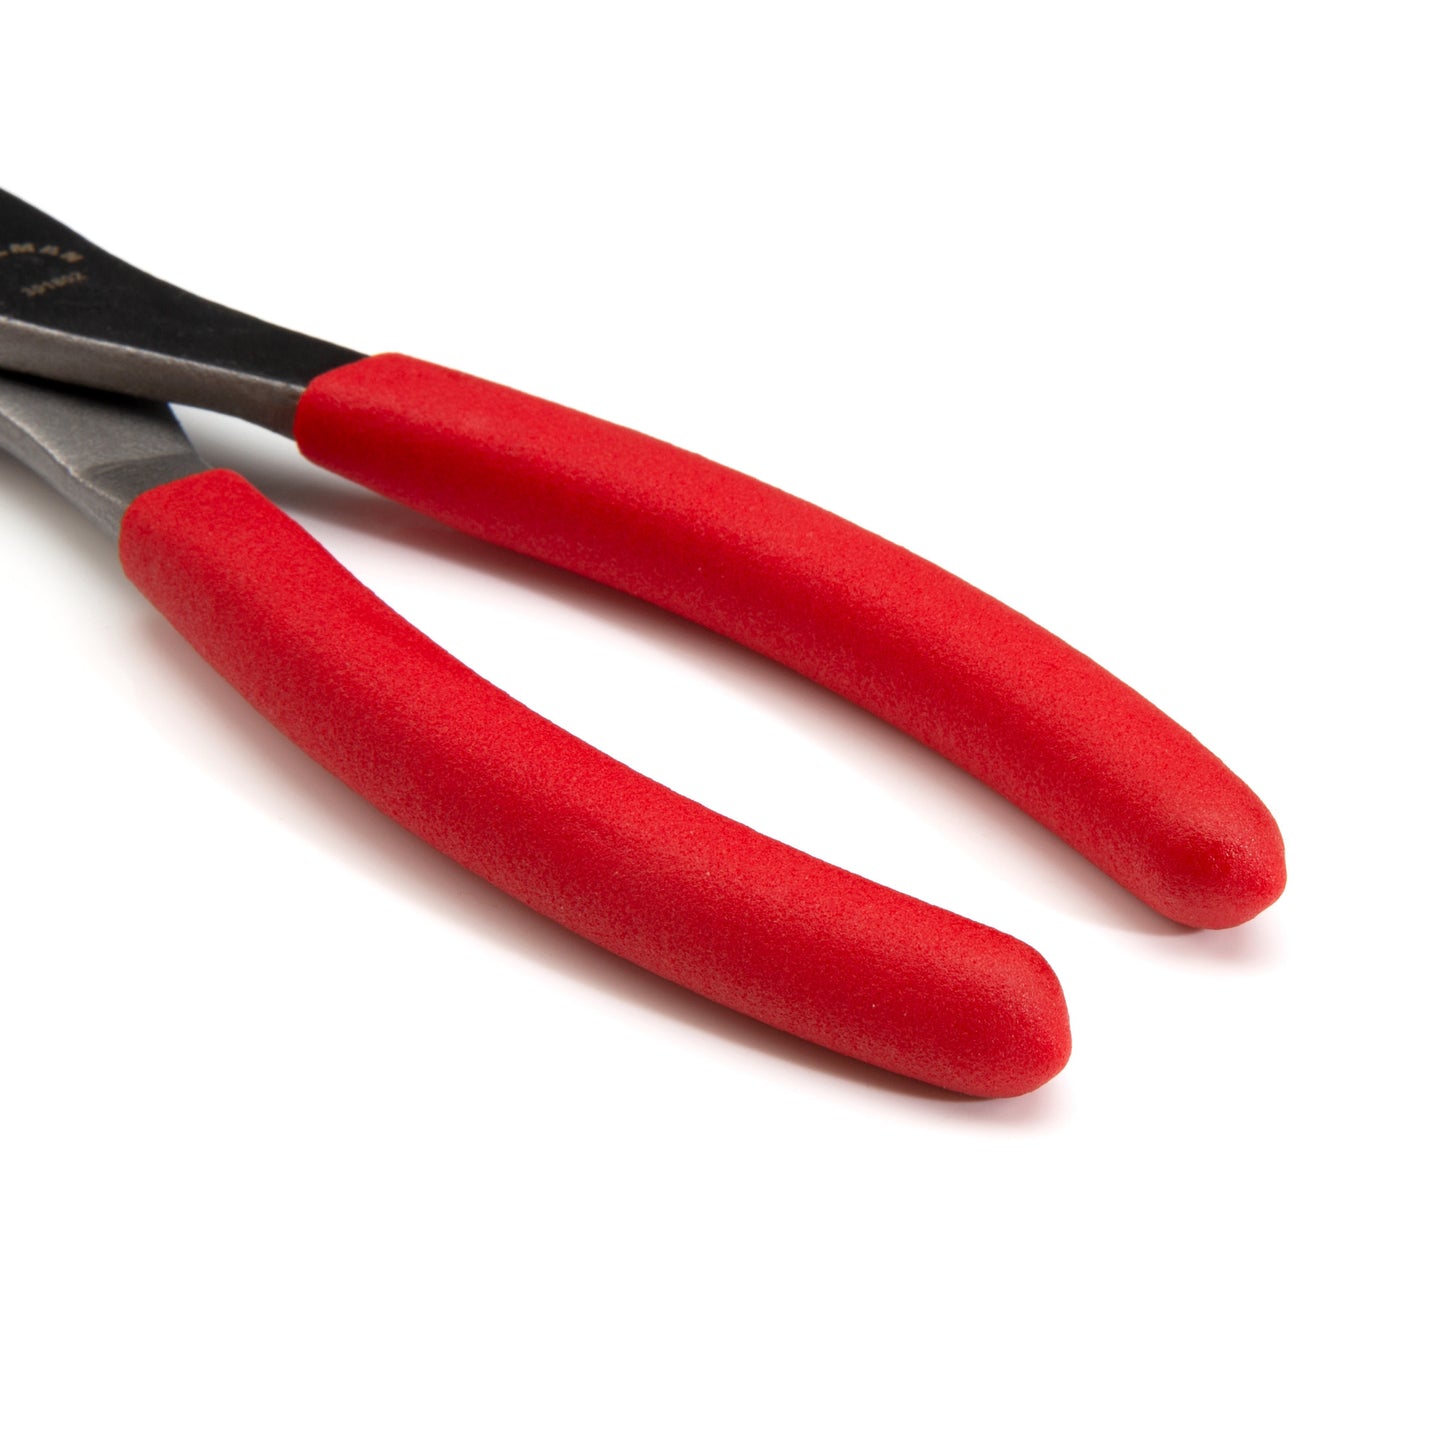 8-inch Slip-Joint Pliers with Wire Cutter